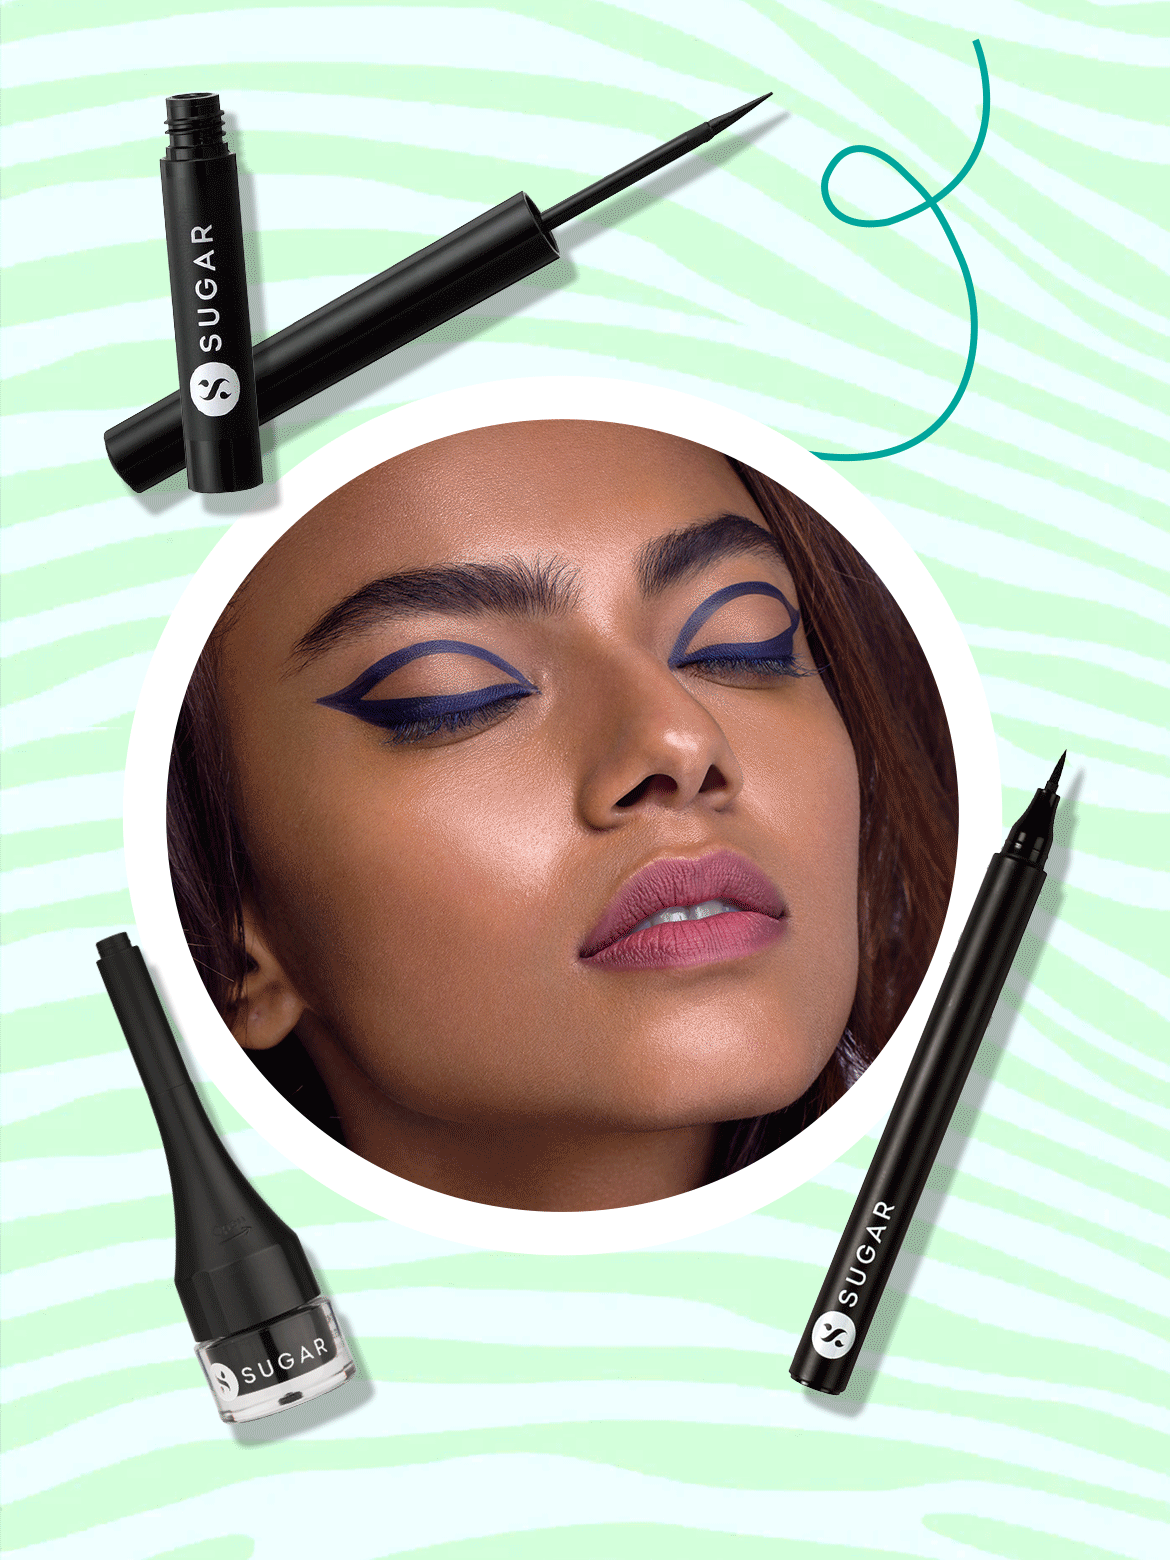 applying eyeliner with pencil